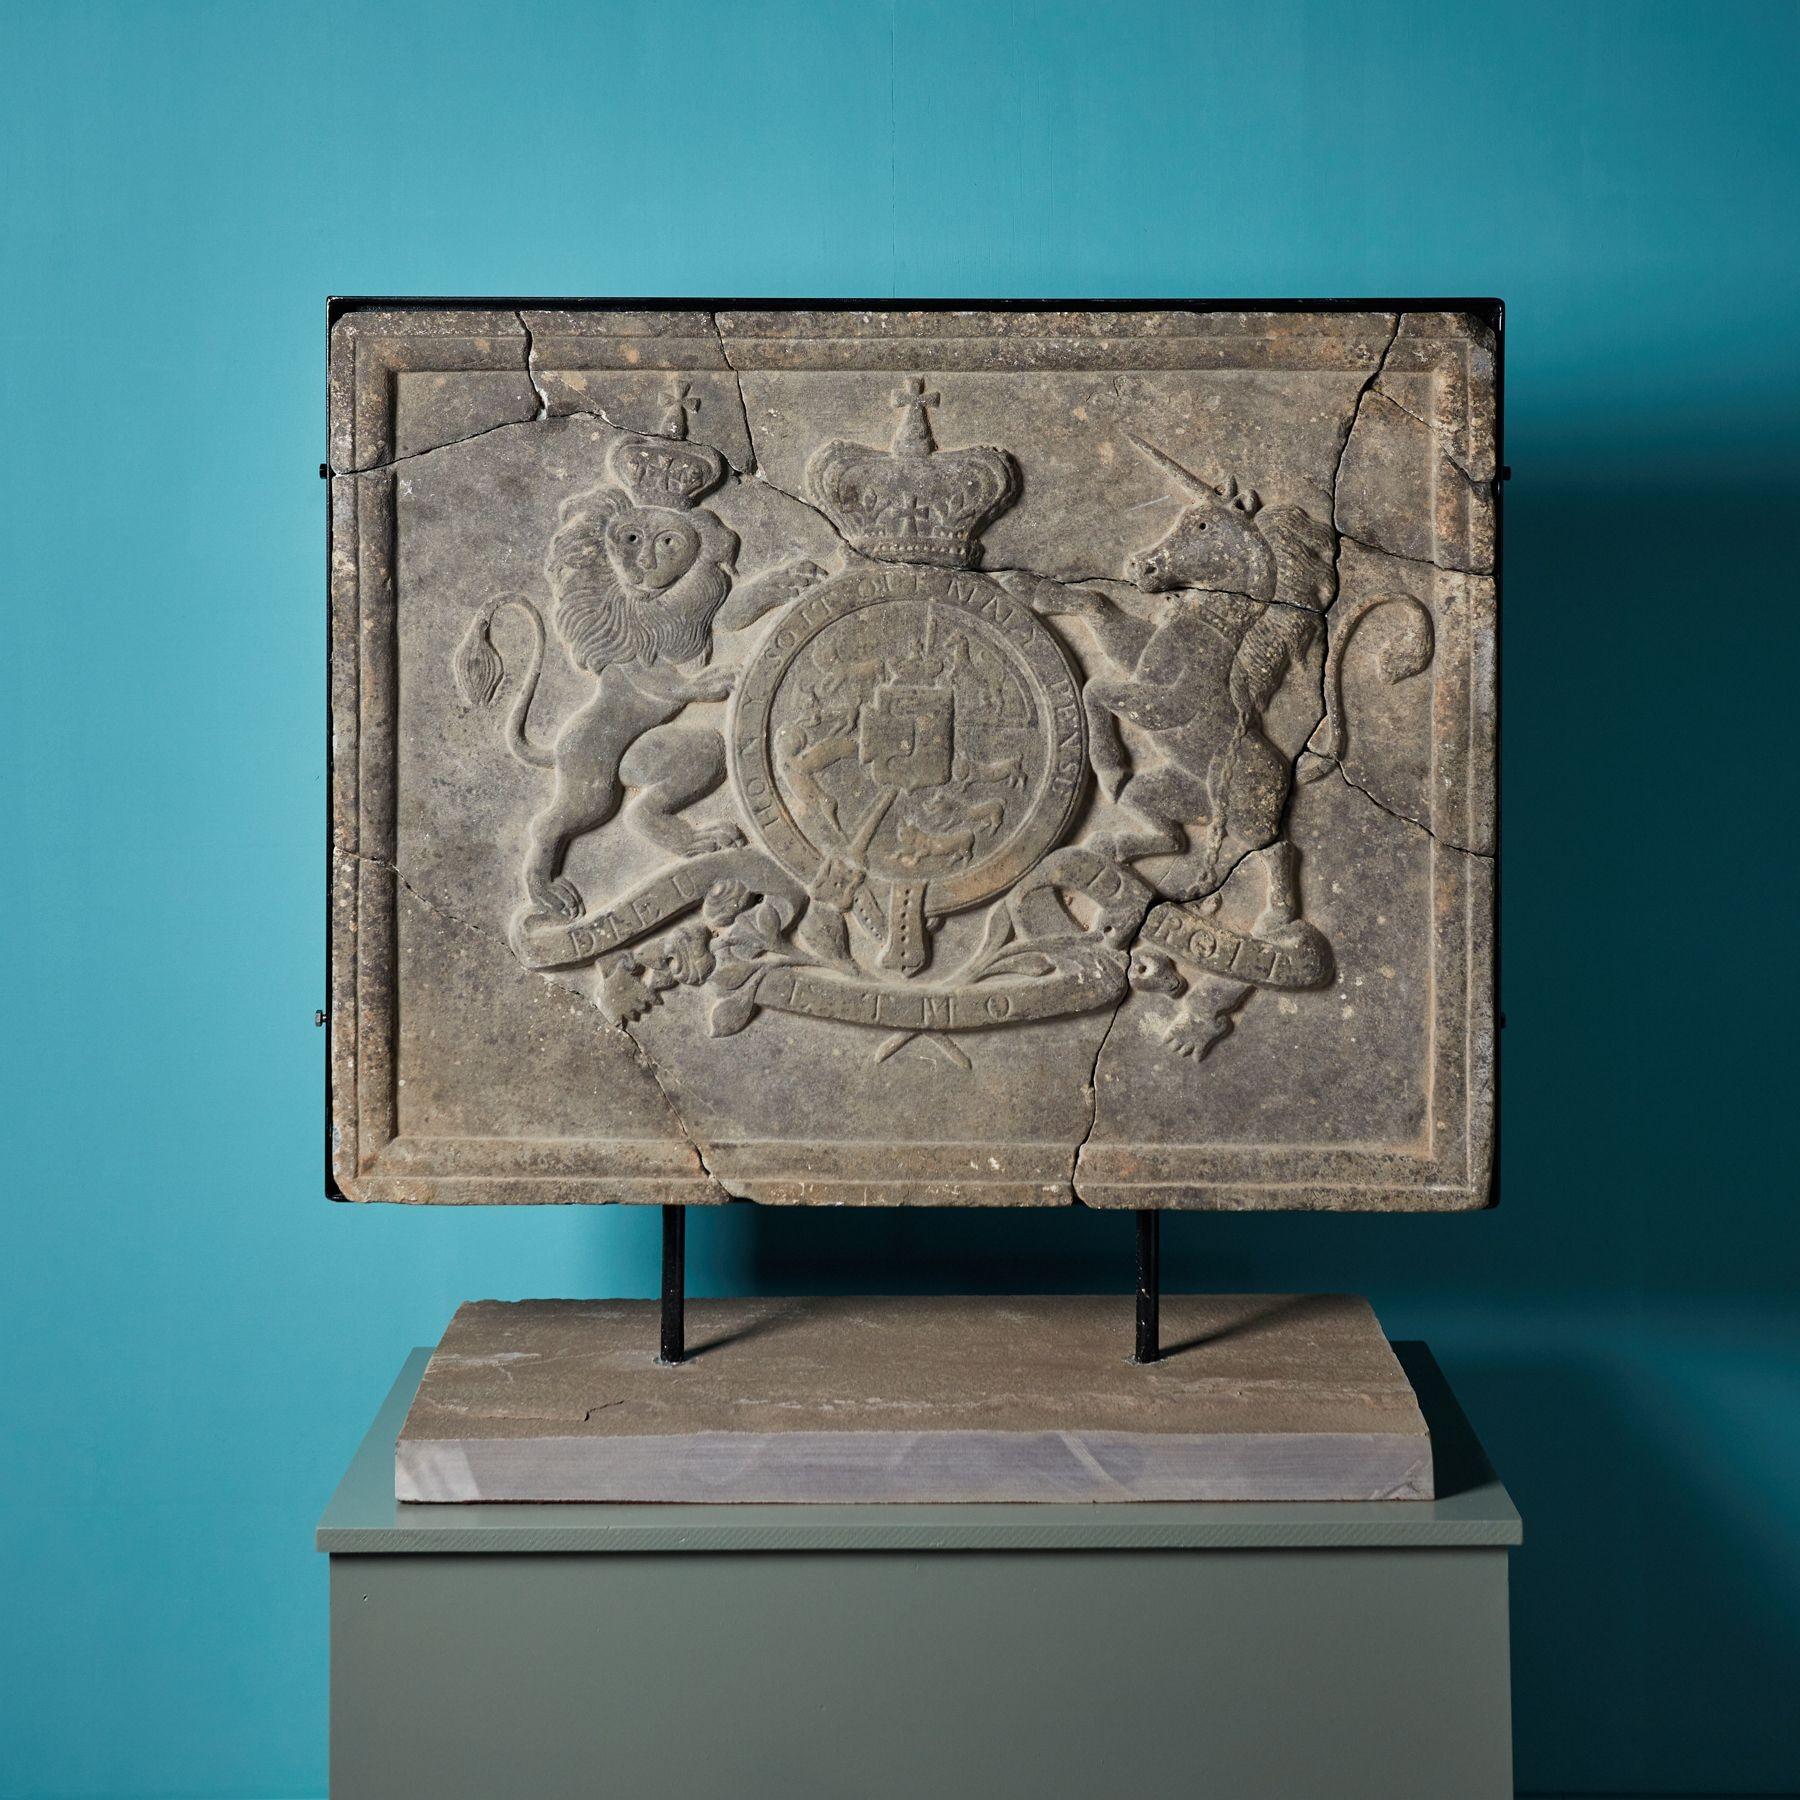 Antique Royal Coat of Arms crest C. 1775. A late Georgian period wall crest. This was fitted to a judicial building in Stoke on Trent. It is carved from white Carrara marble.

The panel has been mounted into a custom steel frame, set into a piece